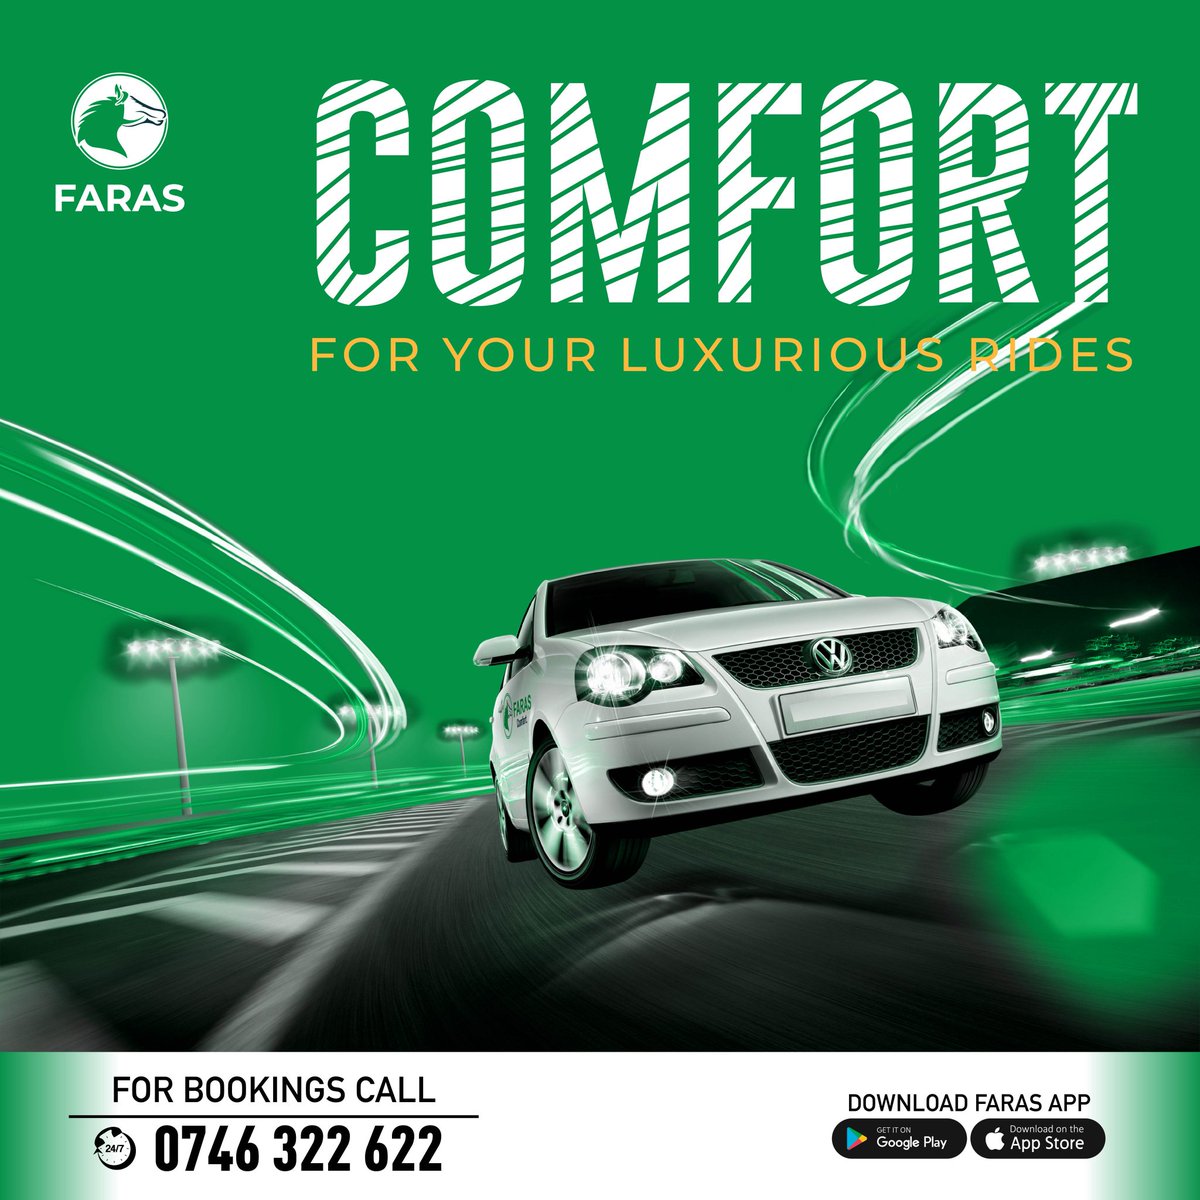 Experience the lap of luxury with #FarasComfort premier taxi service. From impeccable cleanliness to attentive chauffeurs, @farasKenya ensures your journey is as comfortable as it is convenient. Reserve your ride today and indulge in the finest transportation experience!